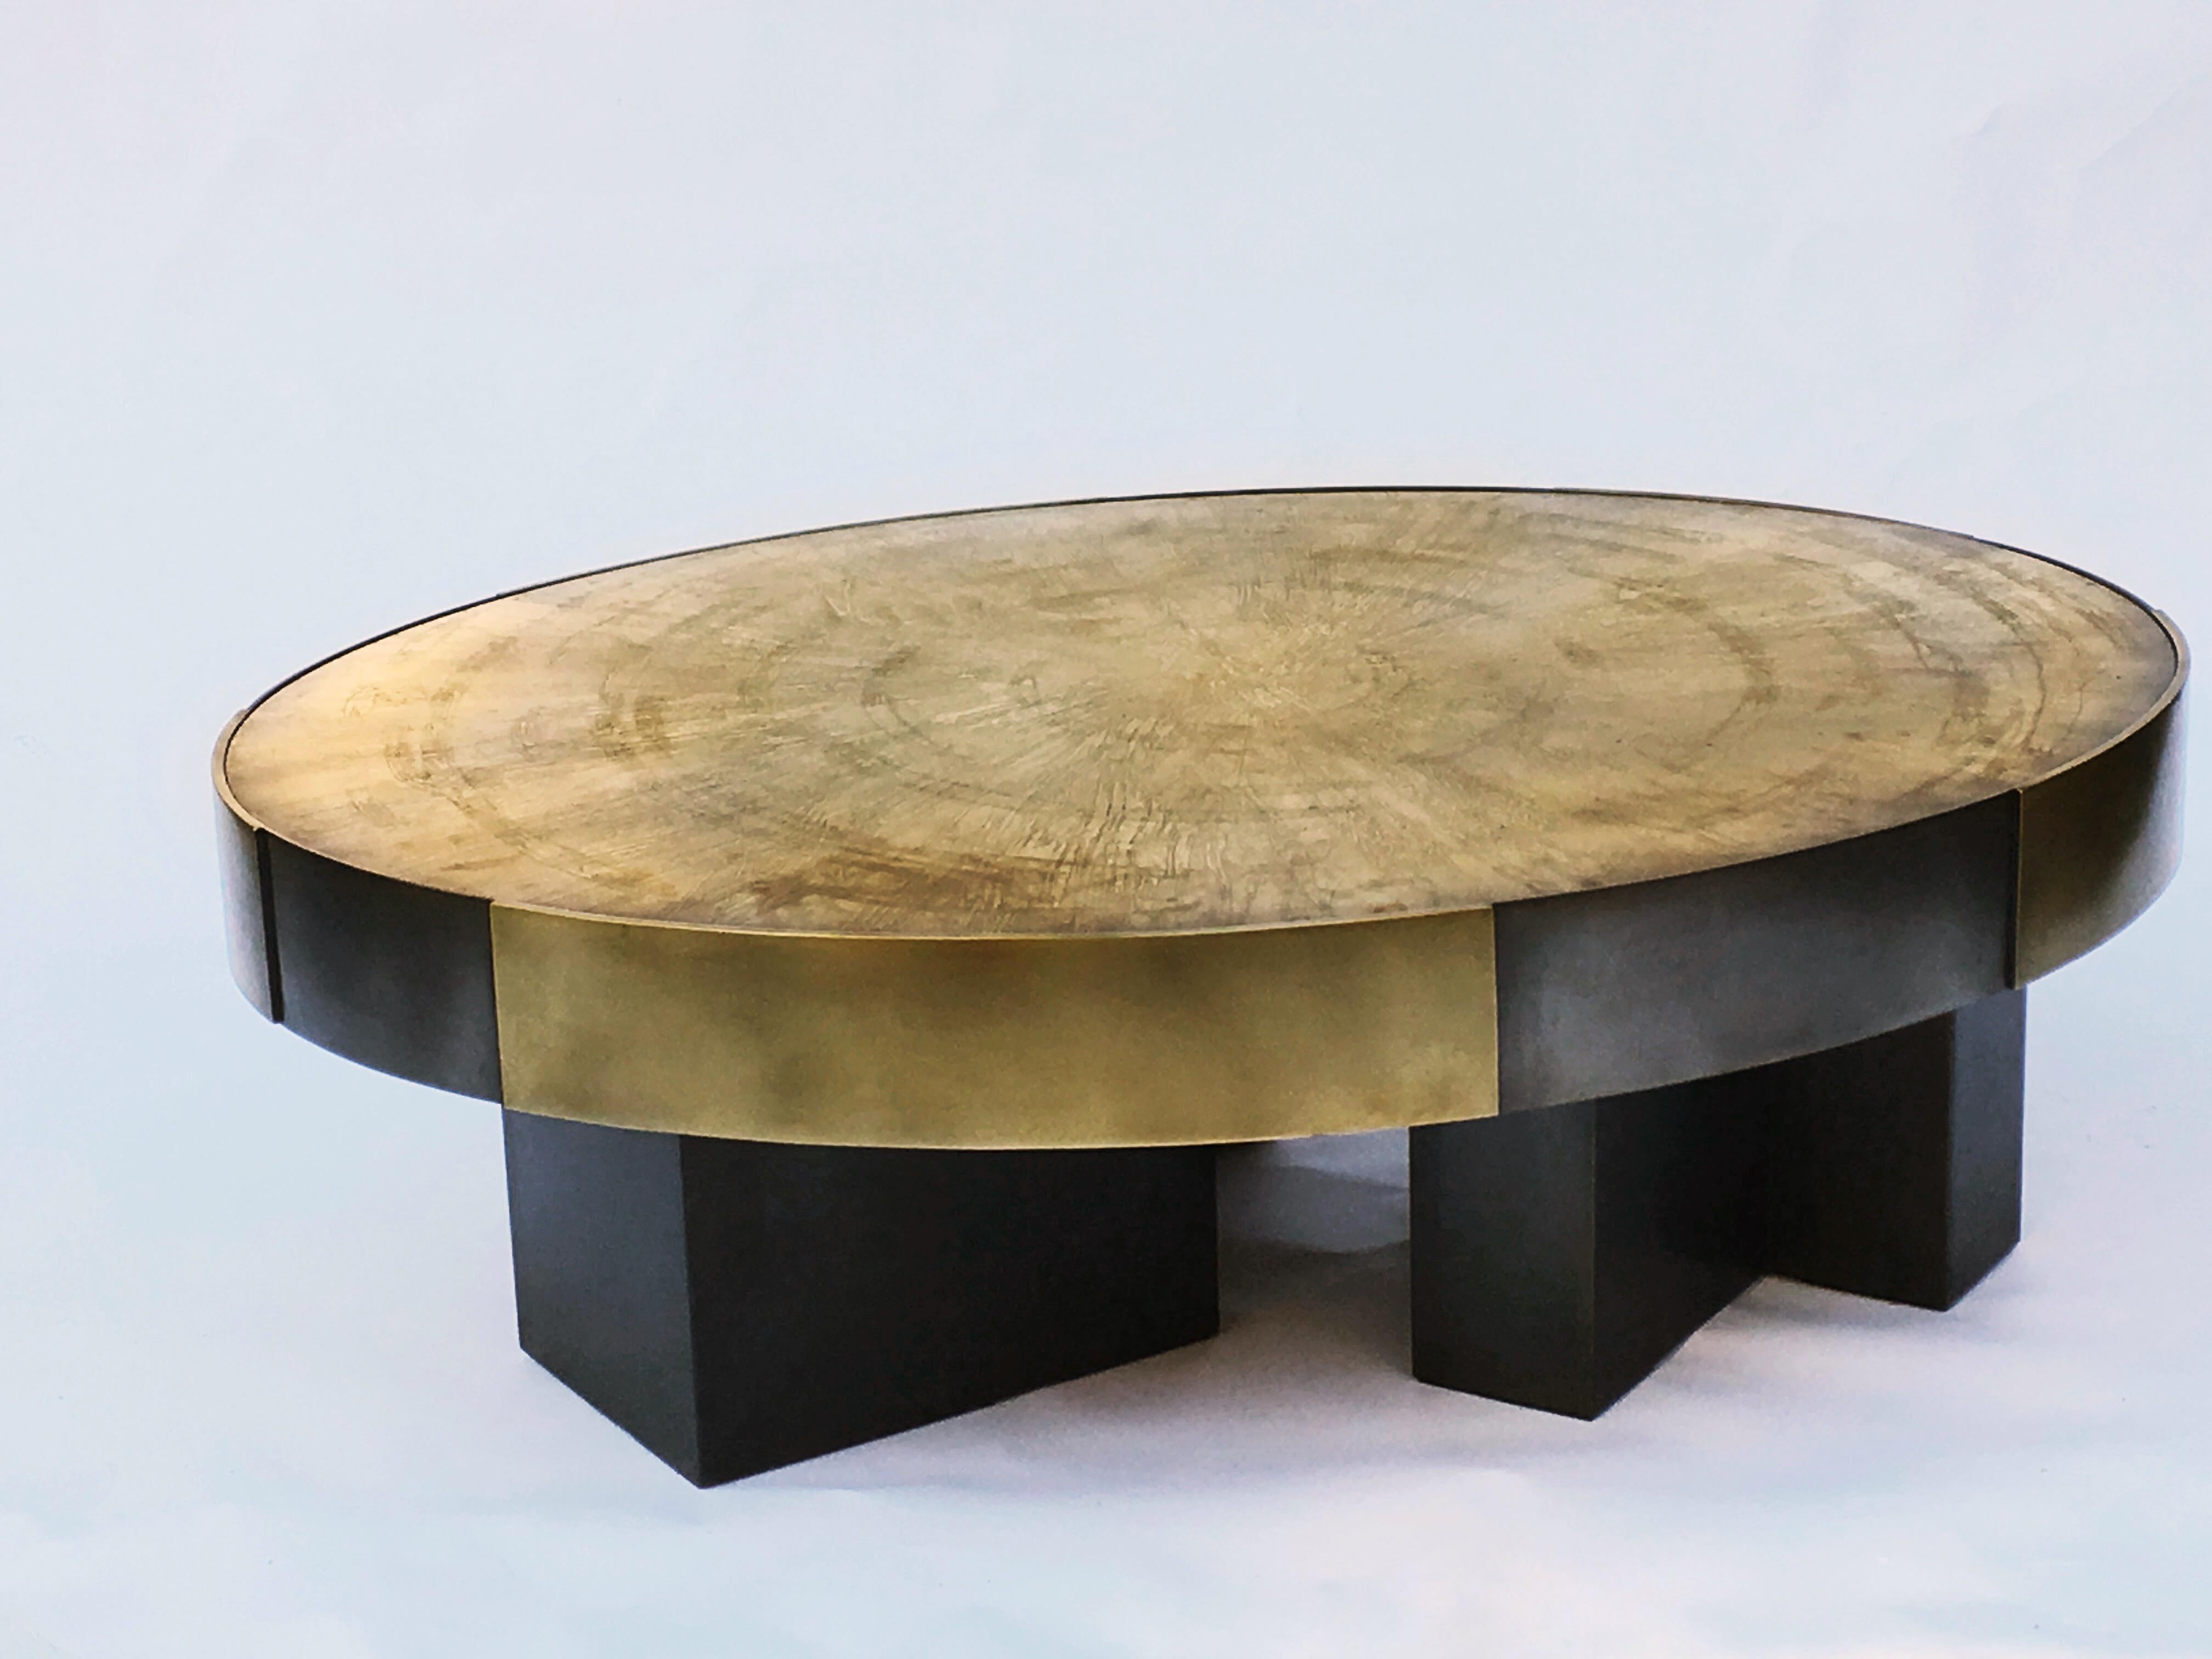 Contemporary Phaux Brass Coffee Table, Signed by Stefan Leo